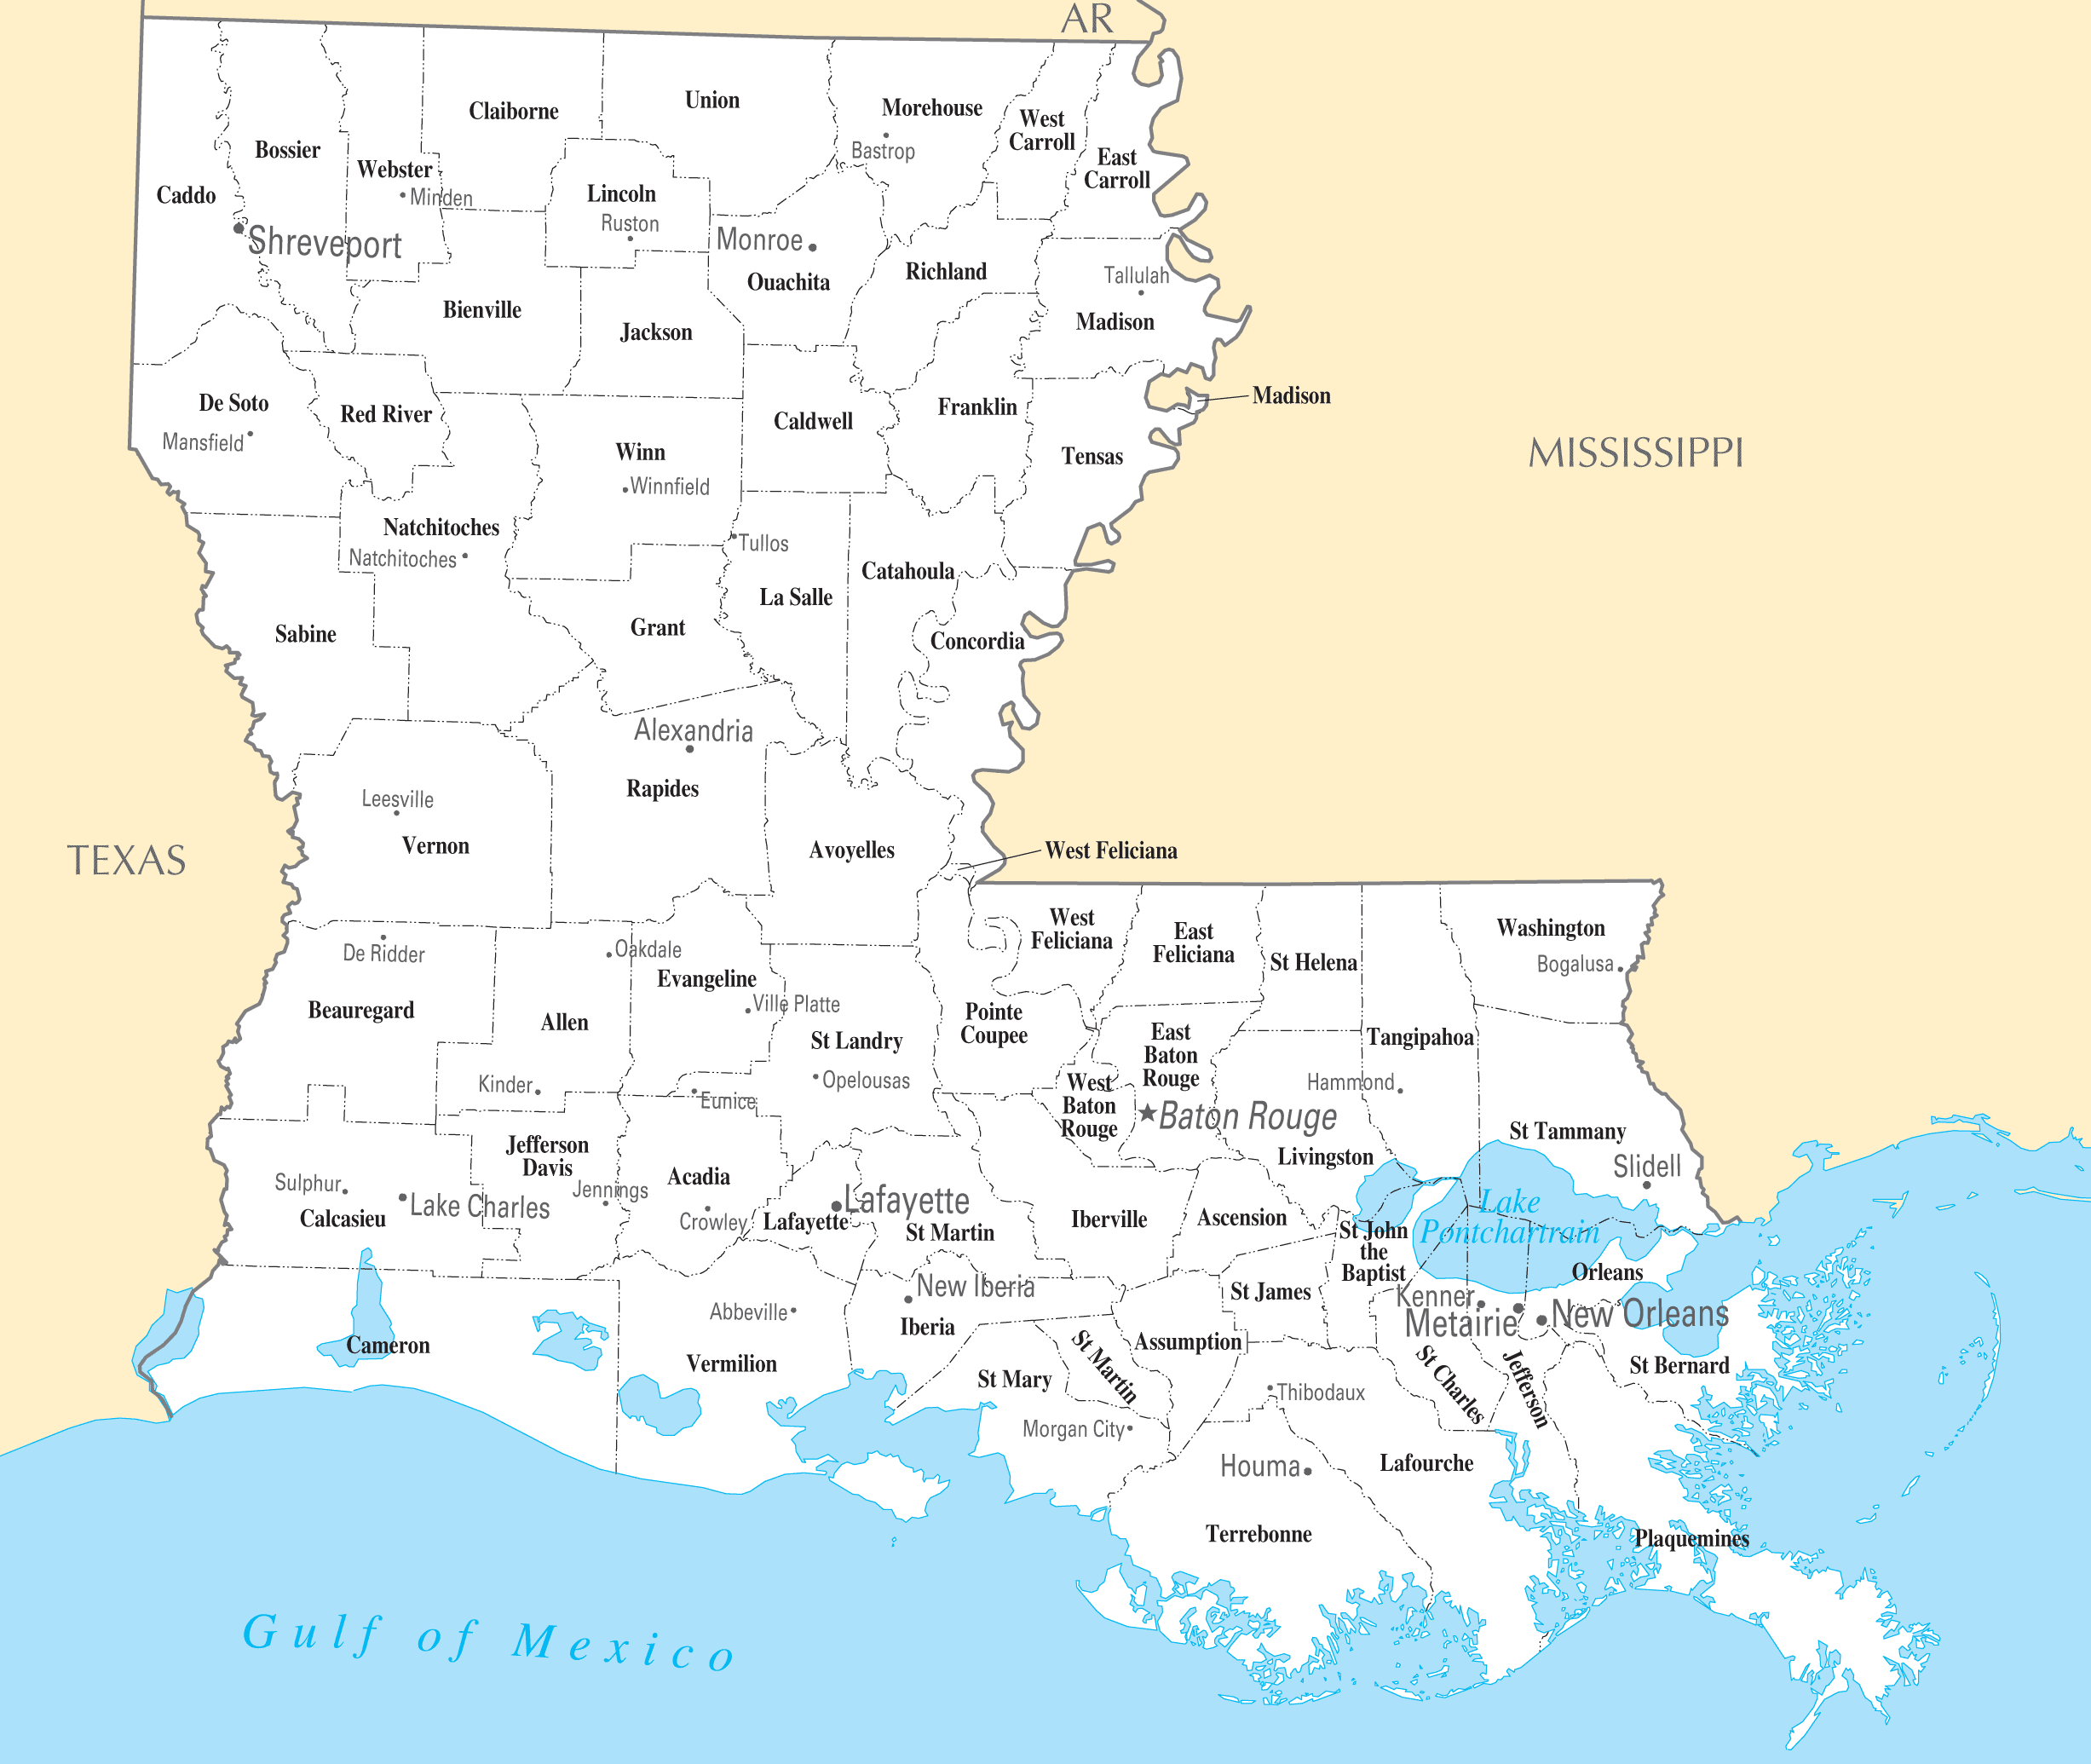 List of: Cities and Towns in Louisiana